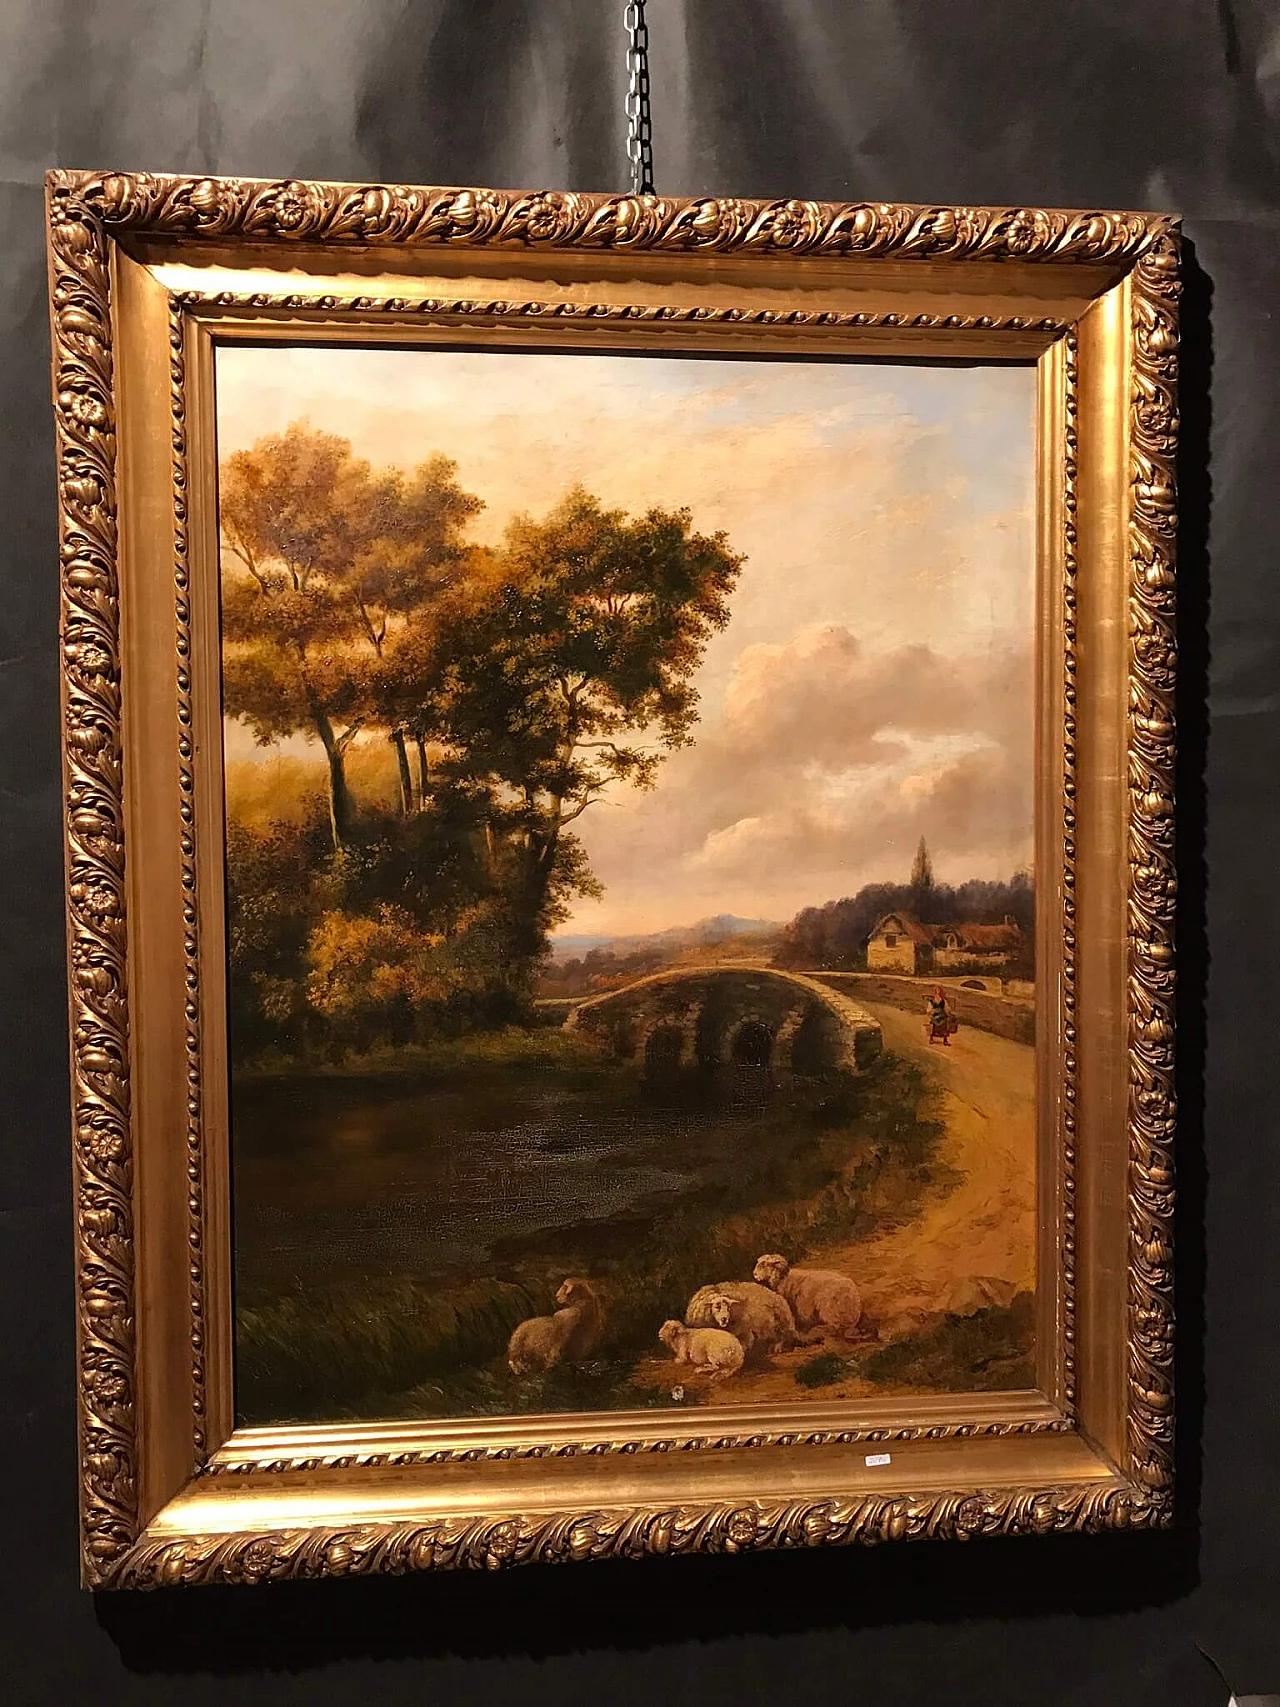 Oil painting on canvas with bucolic landscape, '800 1175905